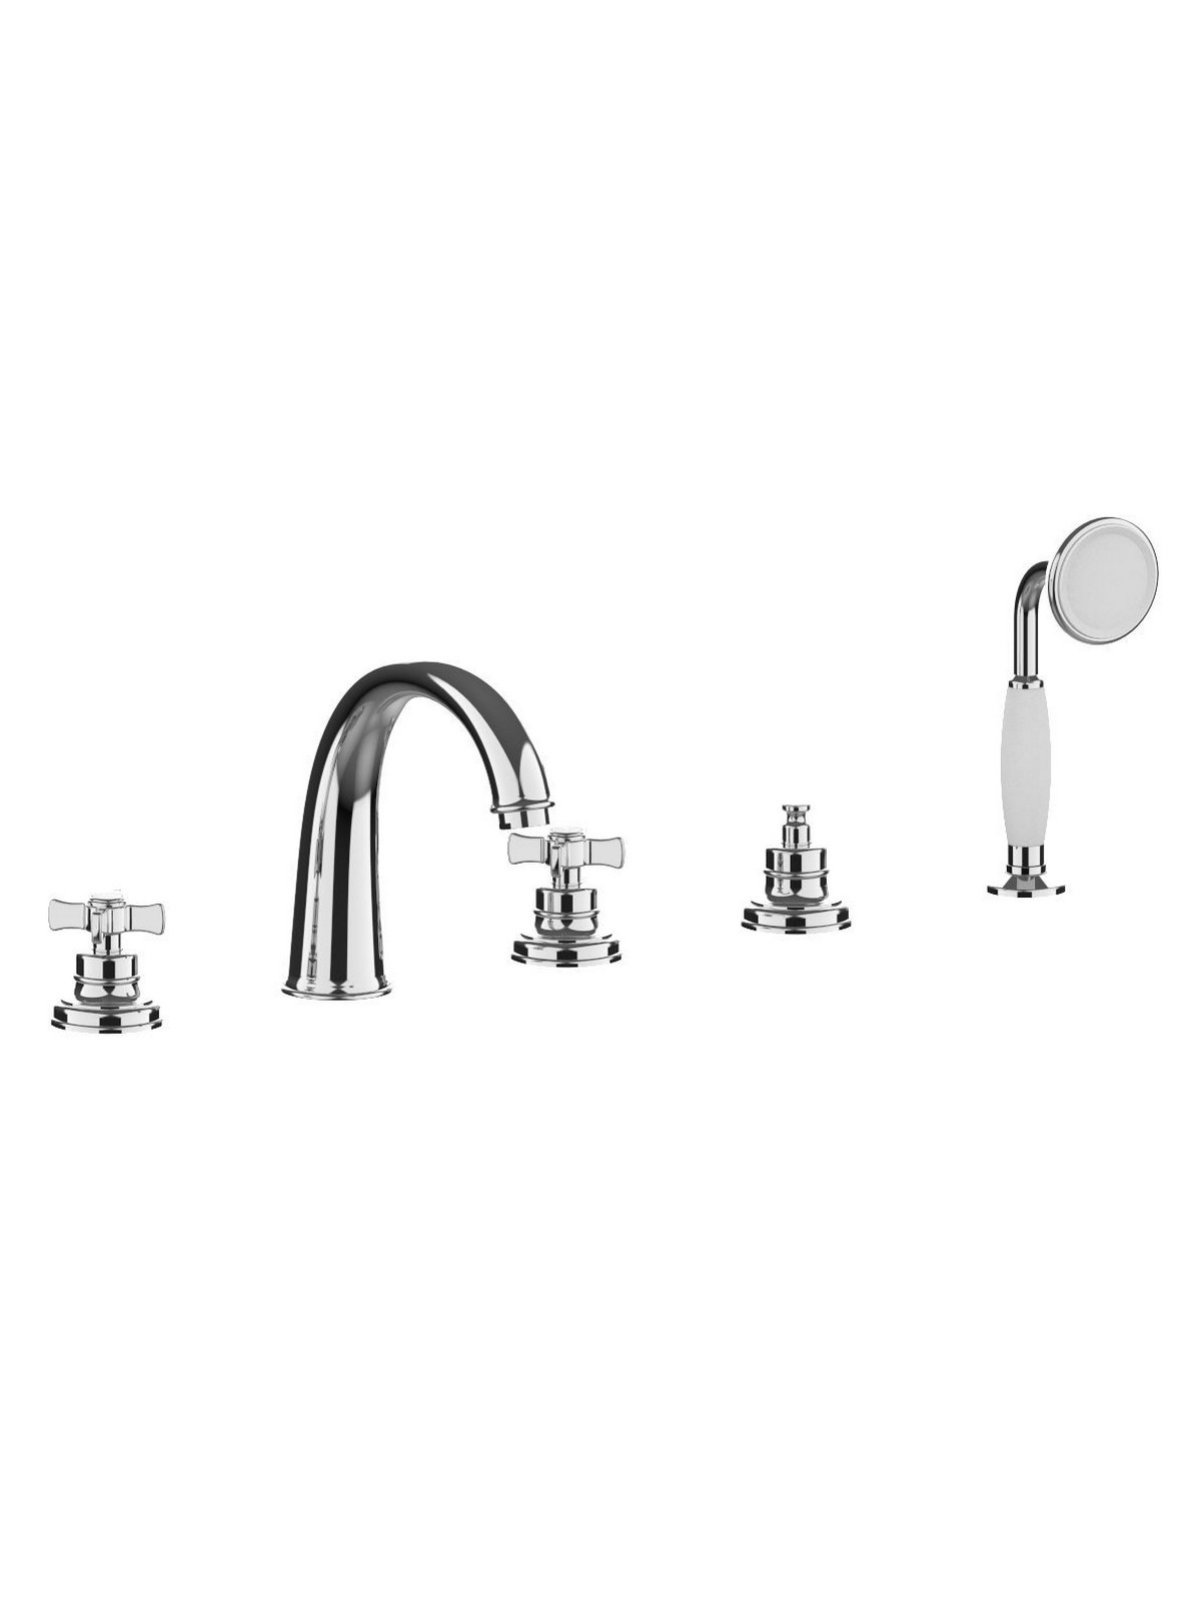 Deck mounted bath mixer with spout